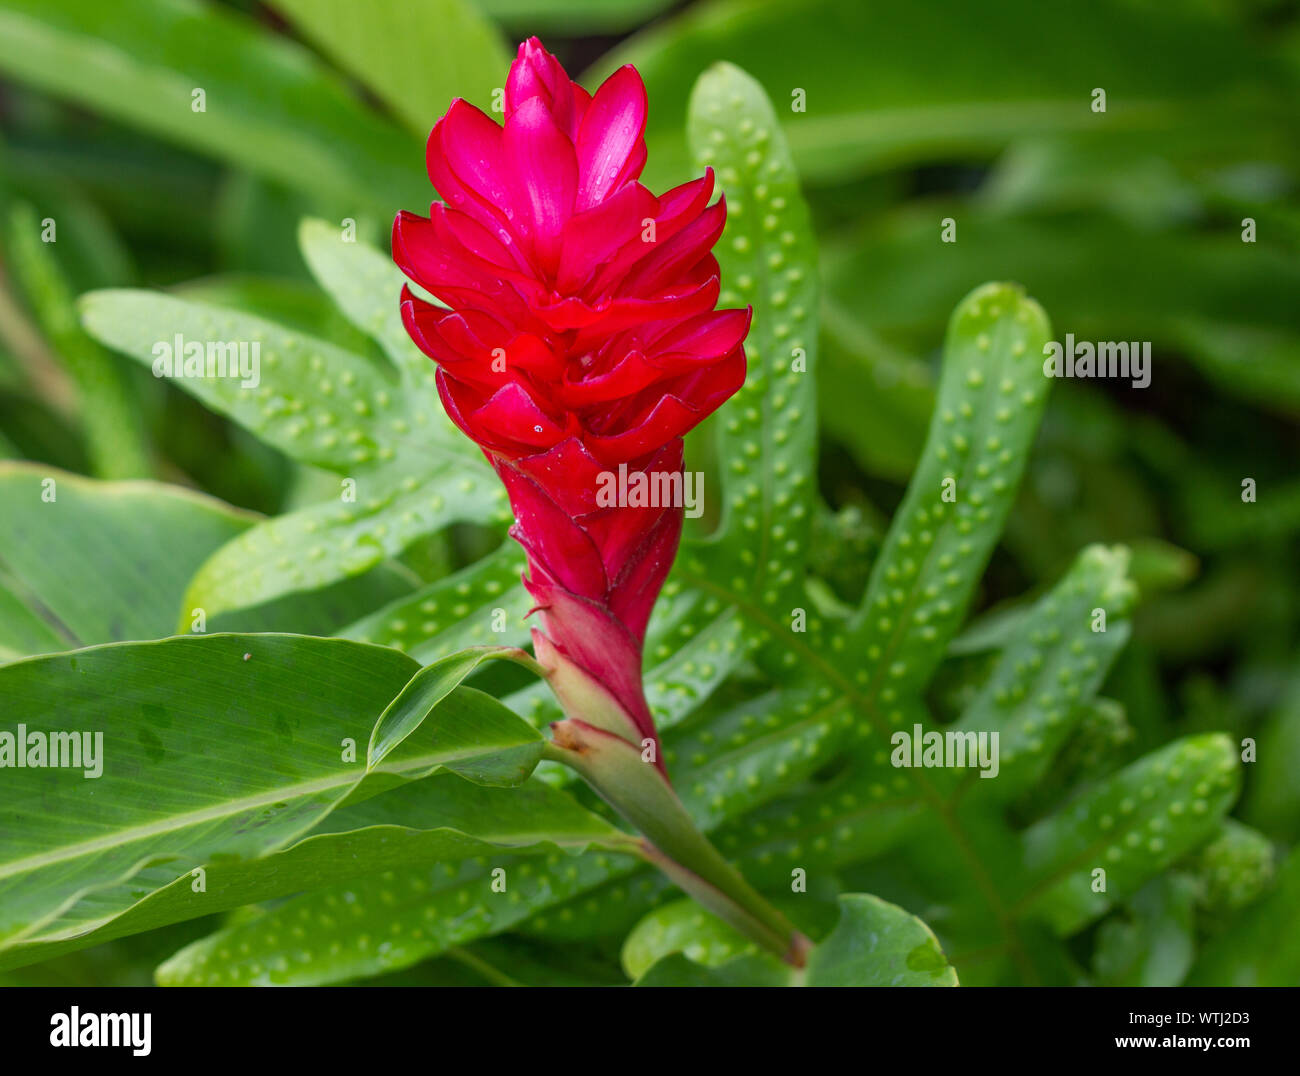 Hawaiian red ginger plant surrounded by green leaves. Stock Photo